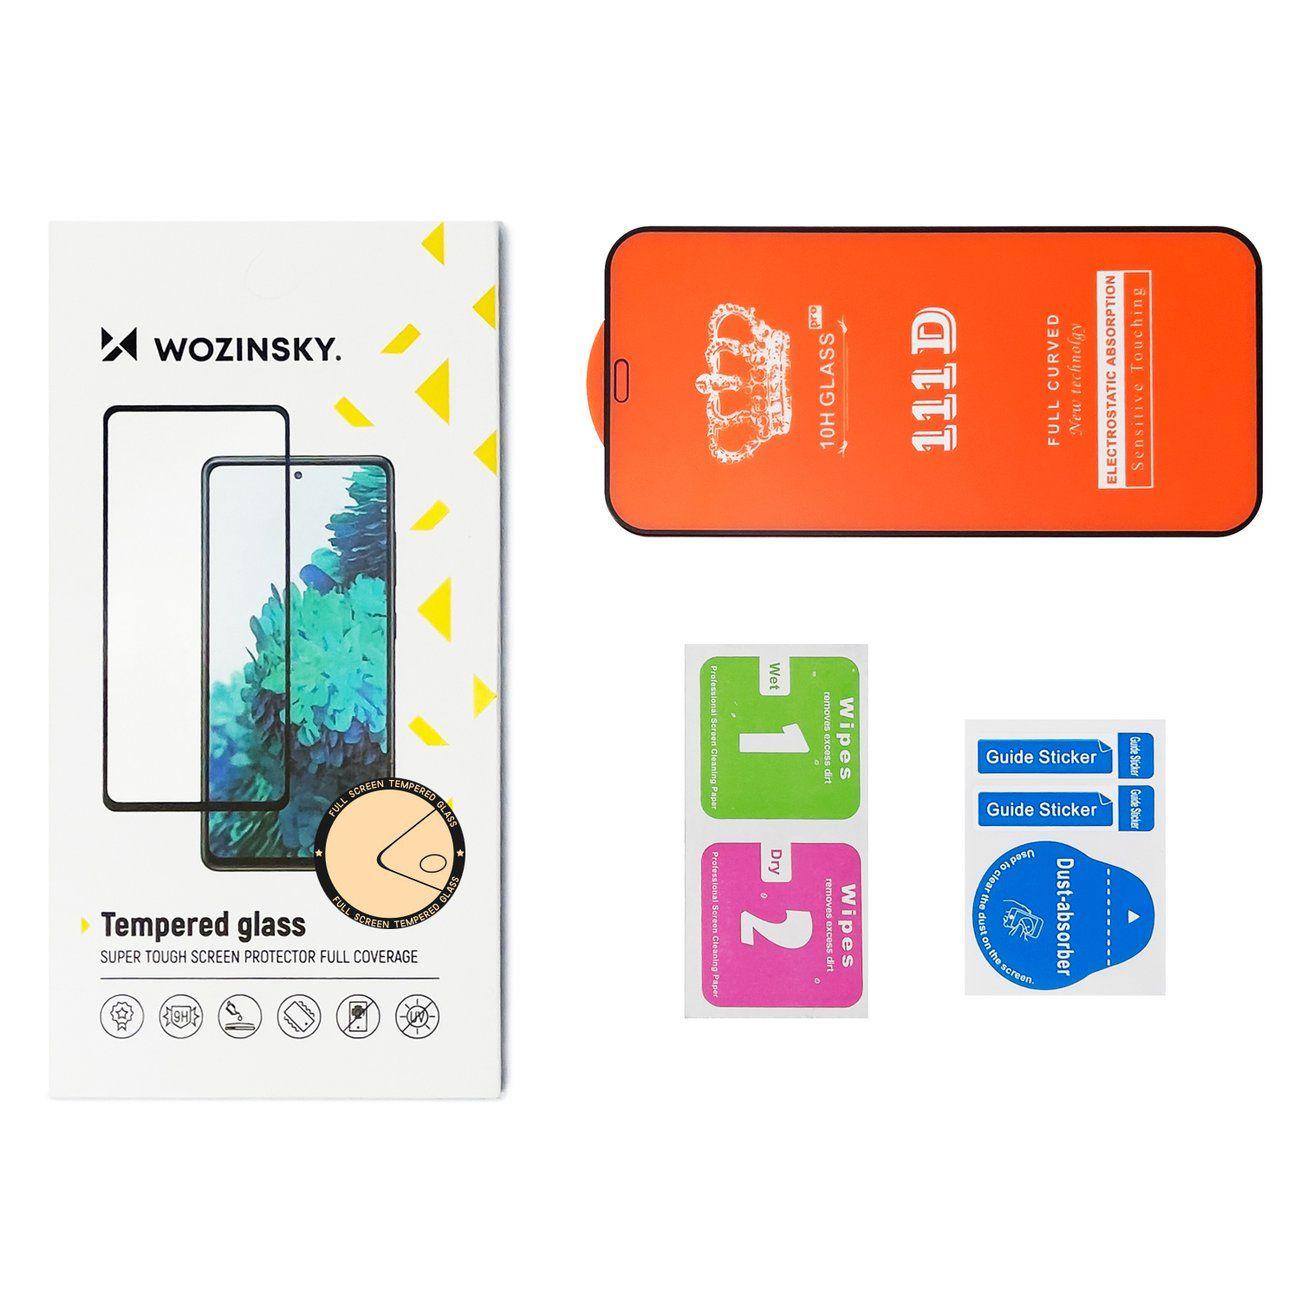 Wozinsky Full Glue Screen Protector Glass Full Coveraged with Frame Case Friendly for Xiaomi Mi Band 7 black